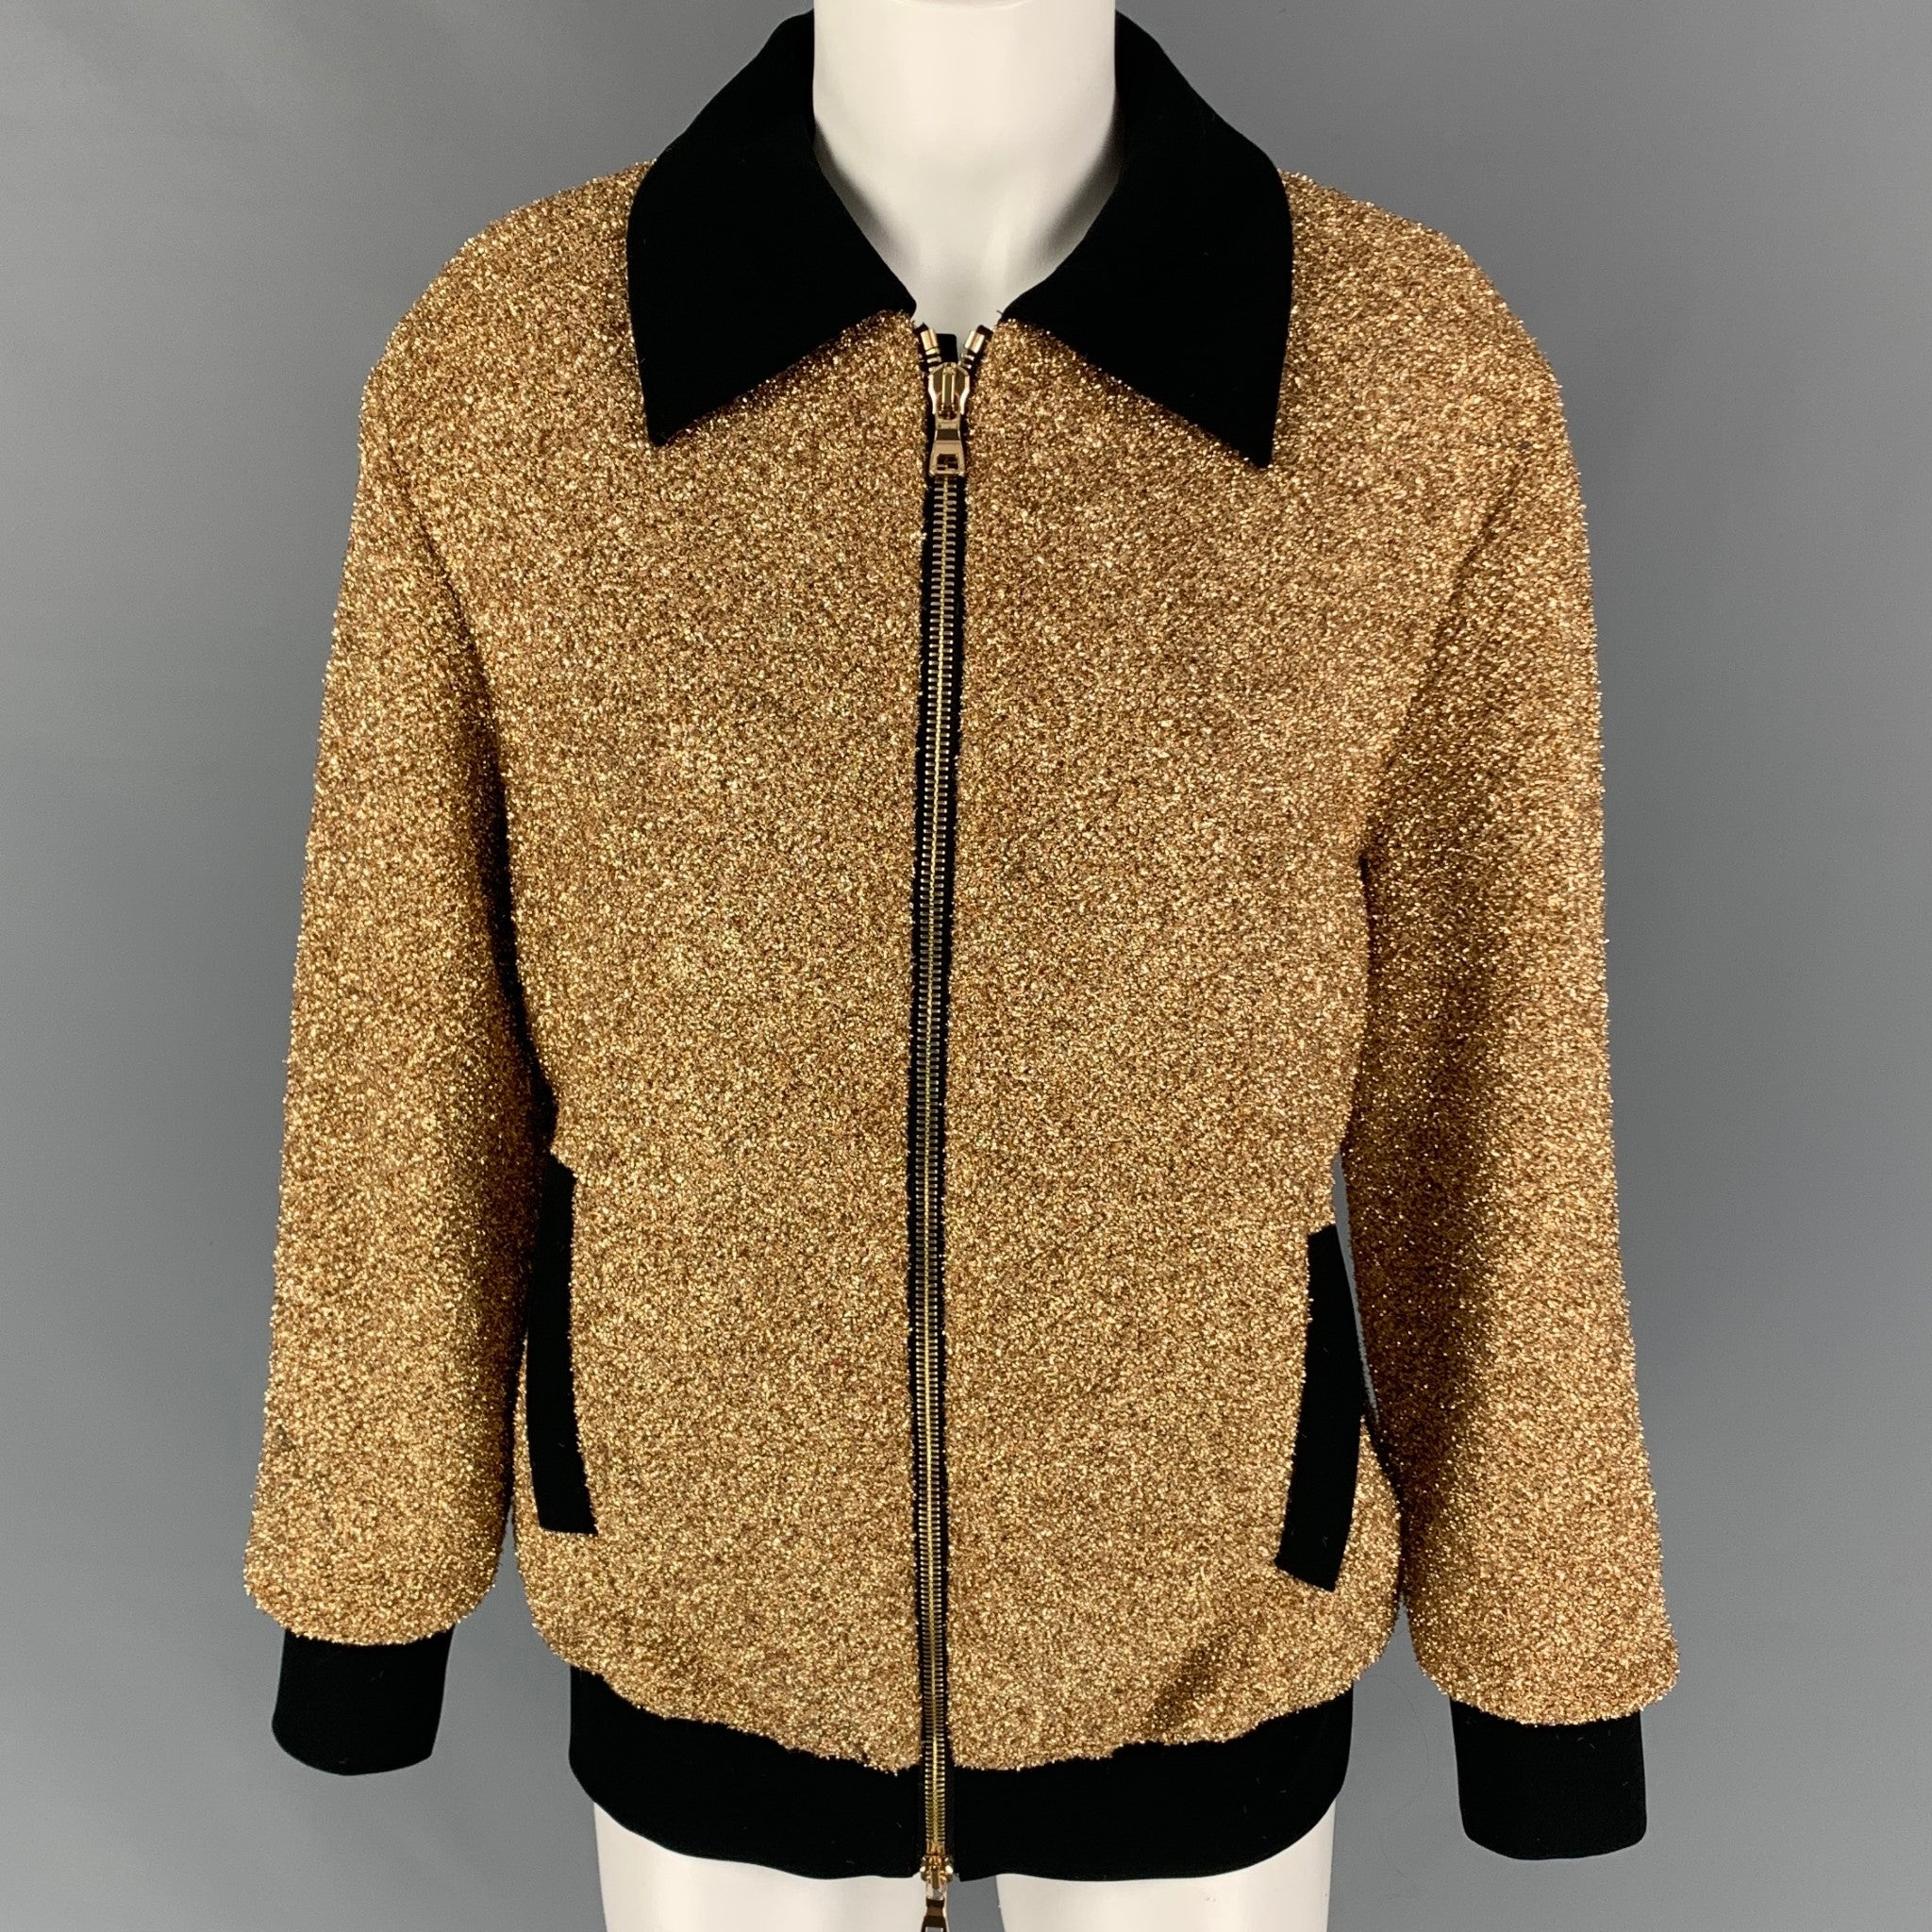 LOUIS VUITTON SKULL LUXURY BROWN BOMBER JACKET, by responsible level